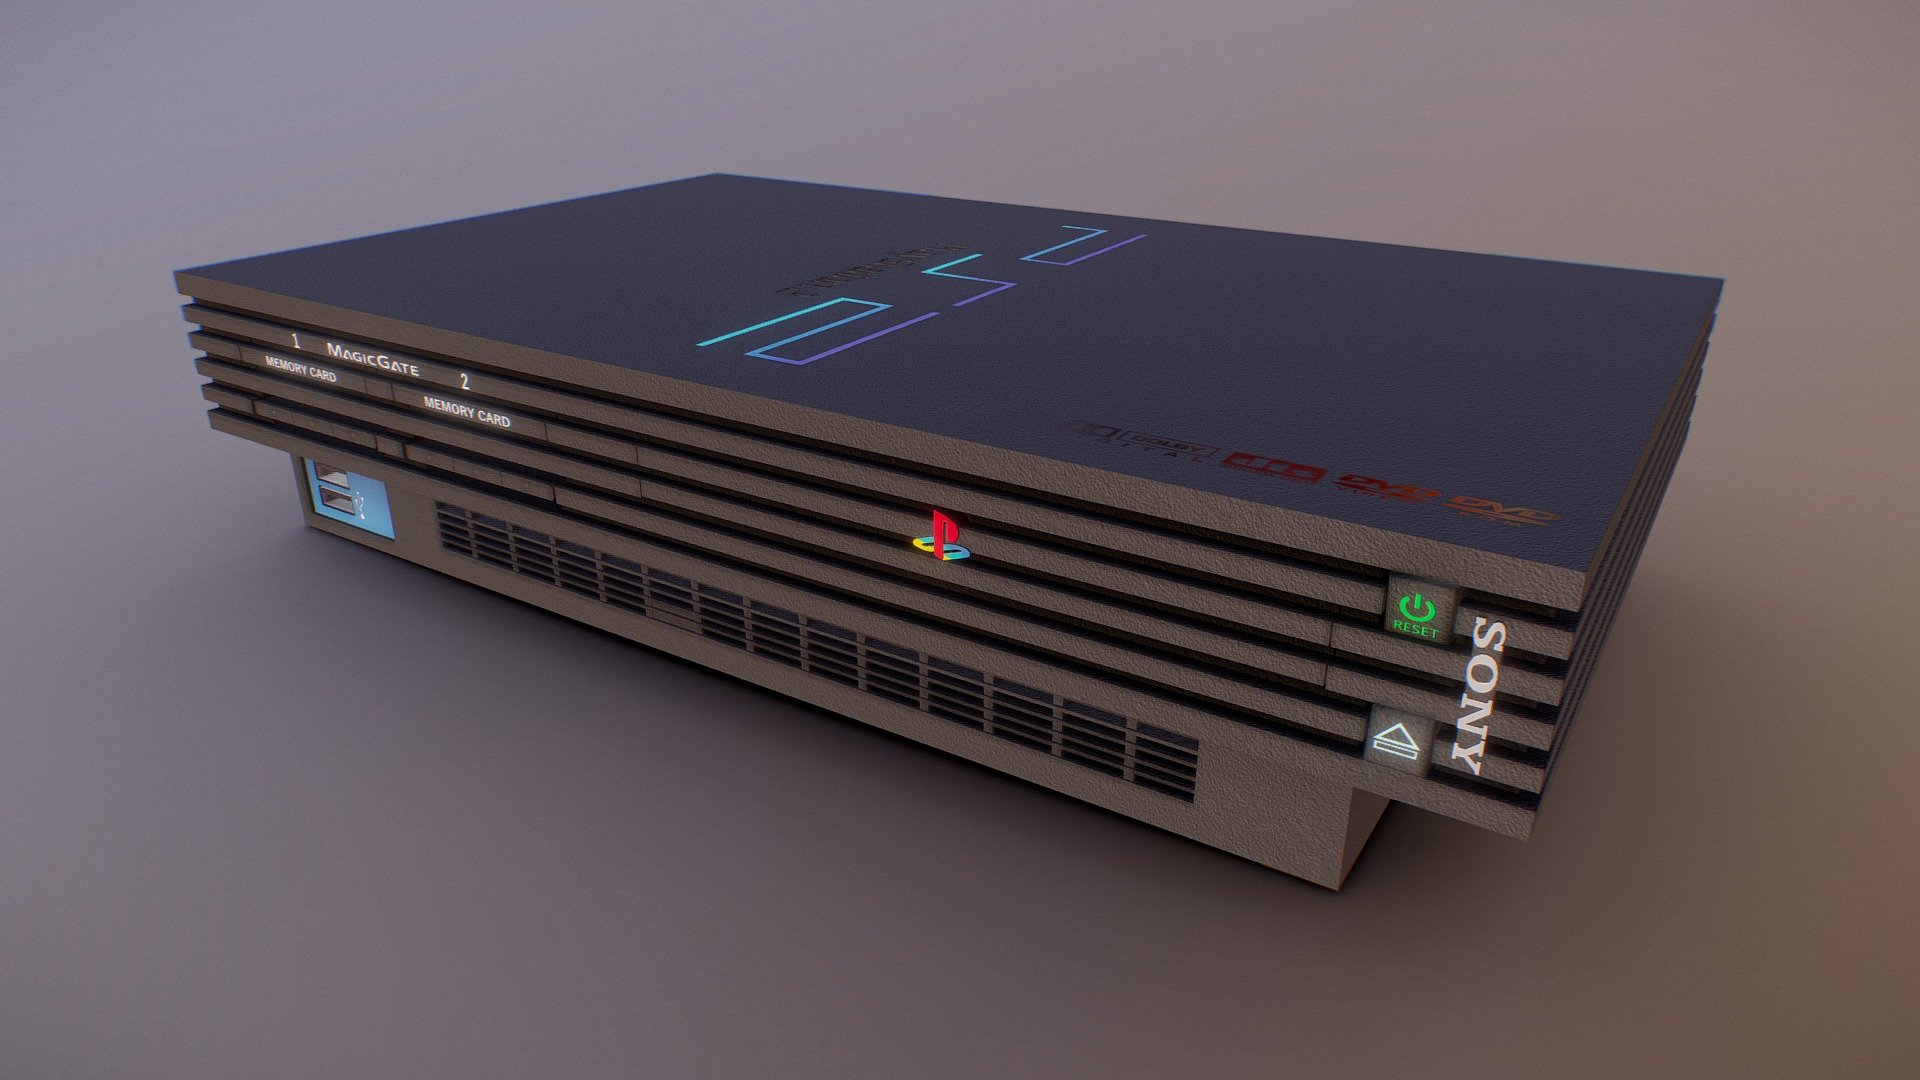 PlayStation 2 (one of the my first models)